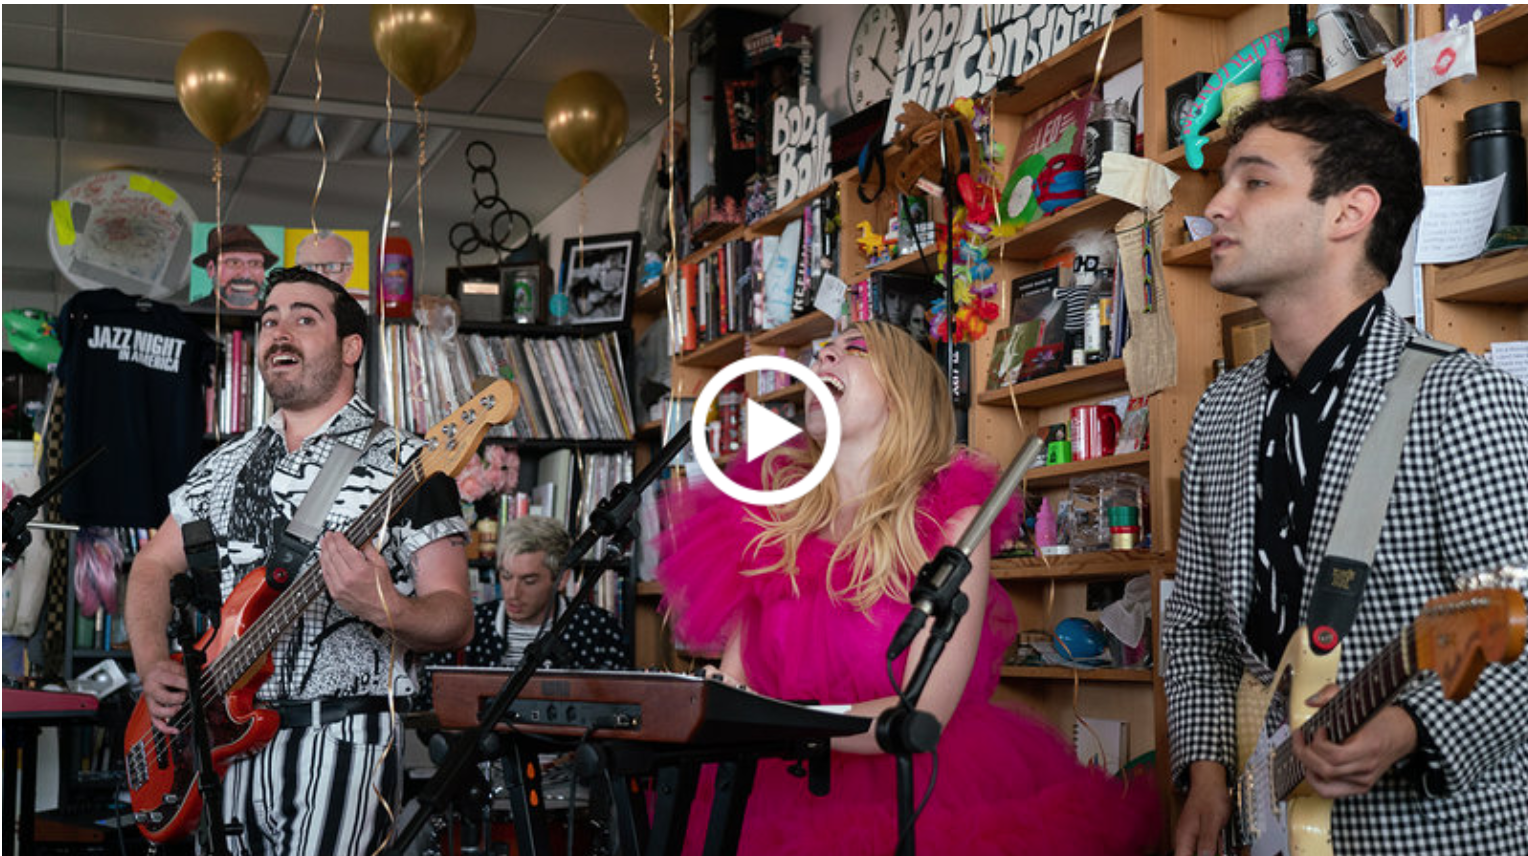 Charly Bliss performing live at NPR Tiny Desk Concert